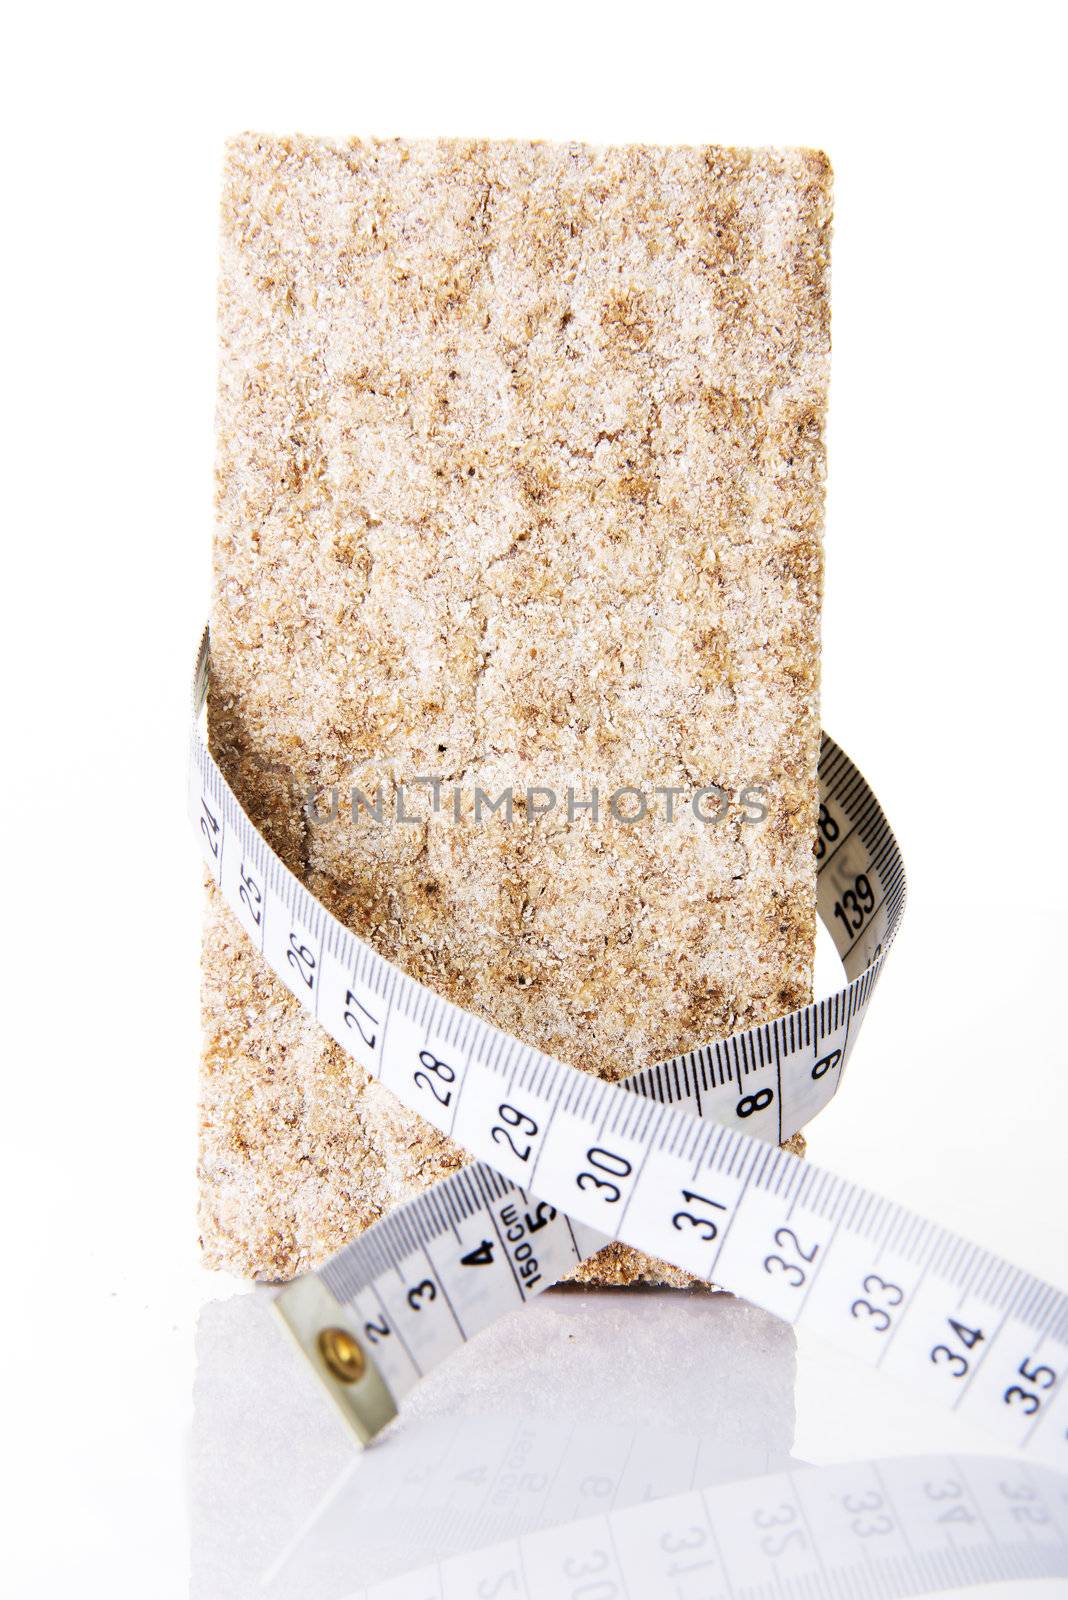 Healthy rye cracker bread with measuring tapy for diet concept